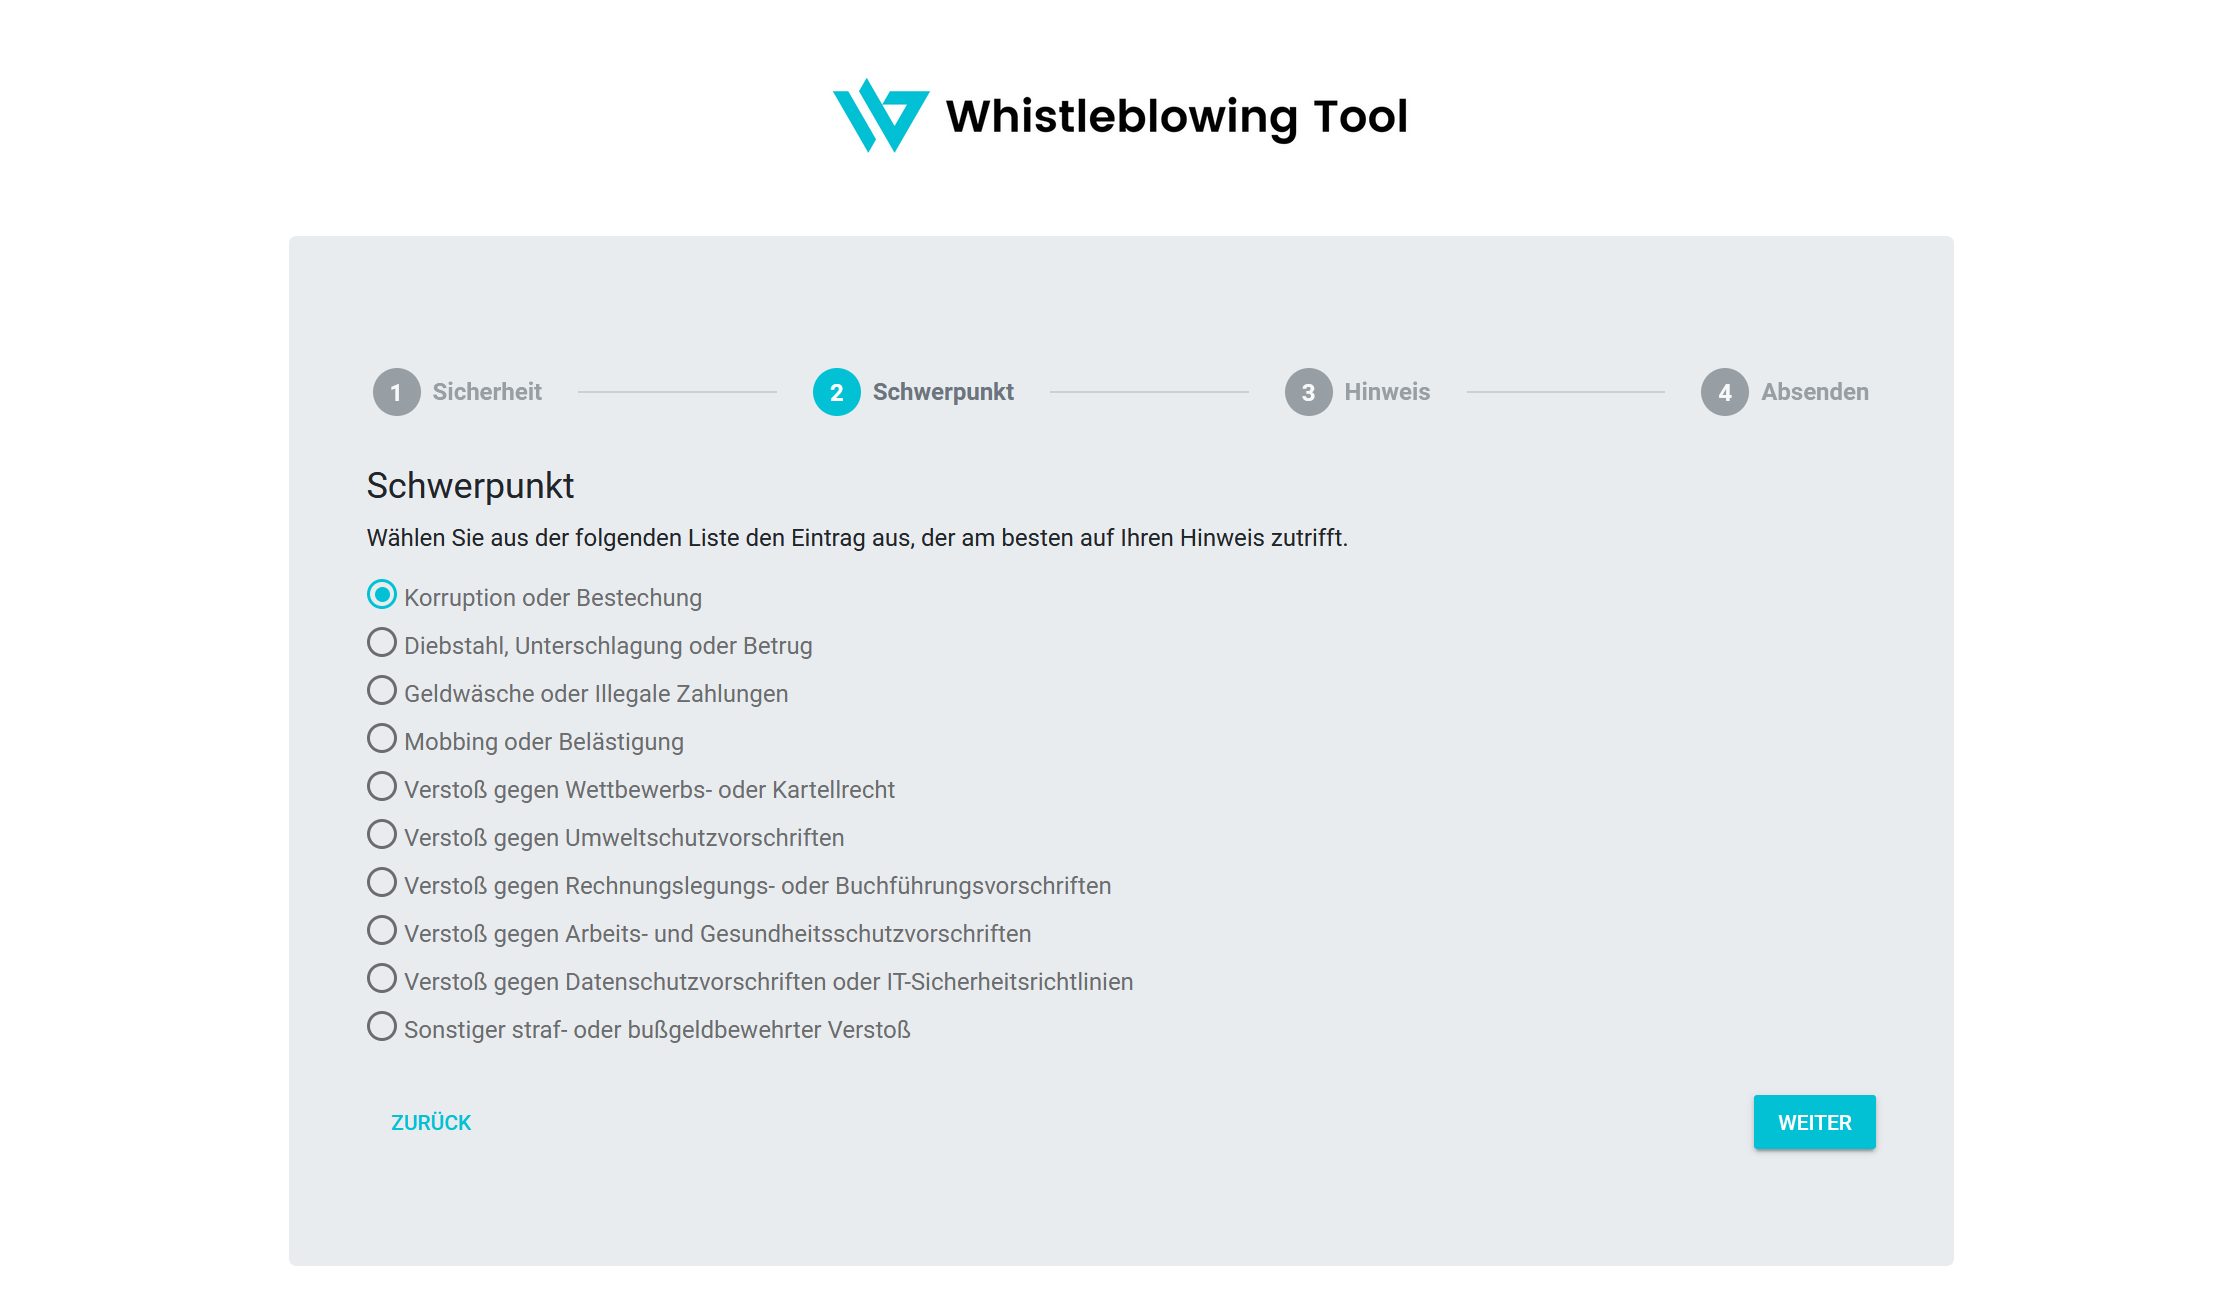 Whistleblowing Tool Software - 2